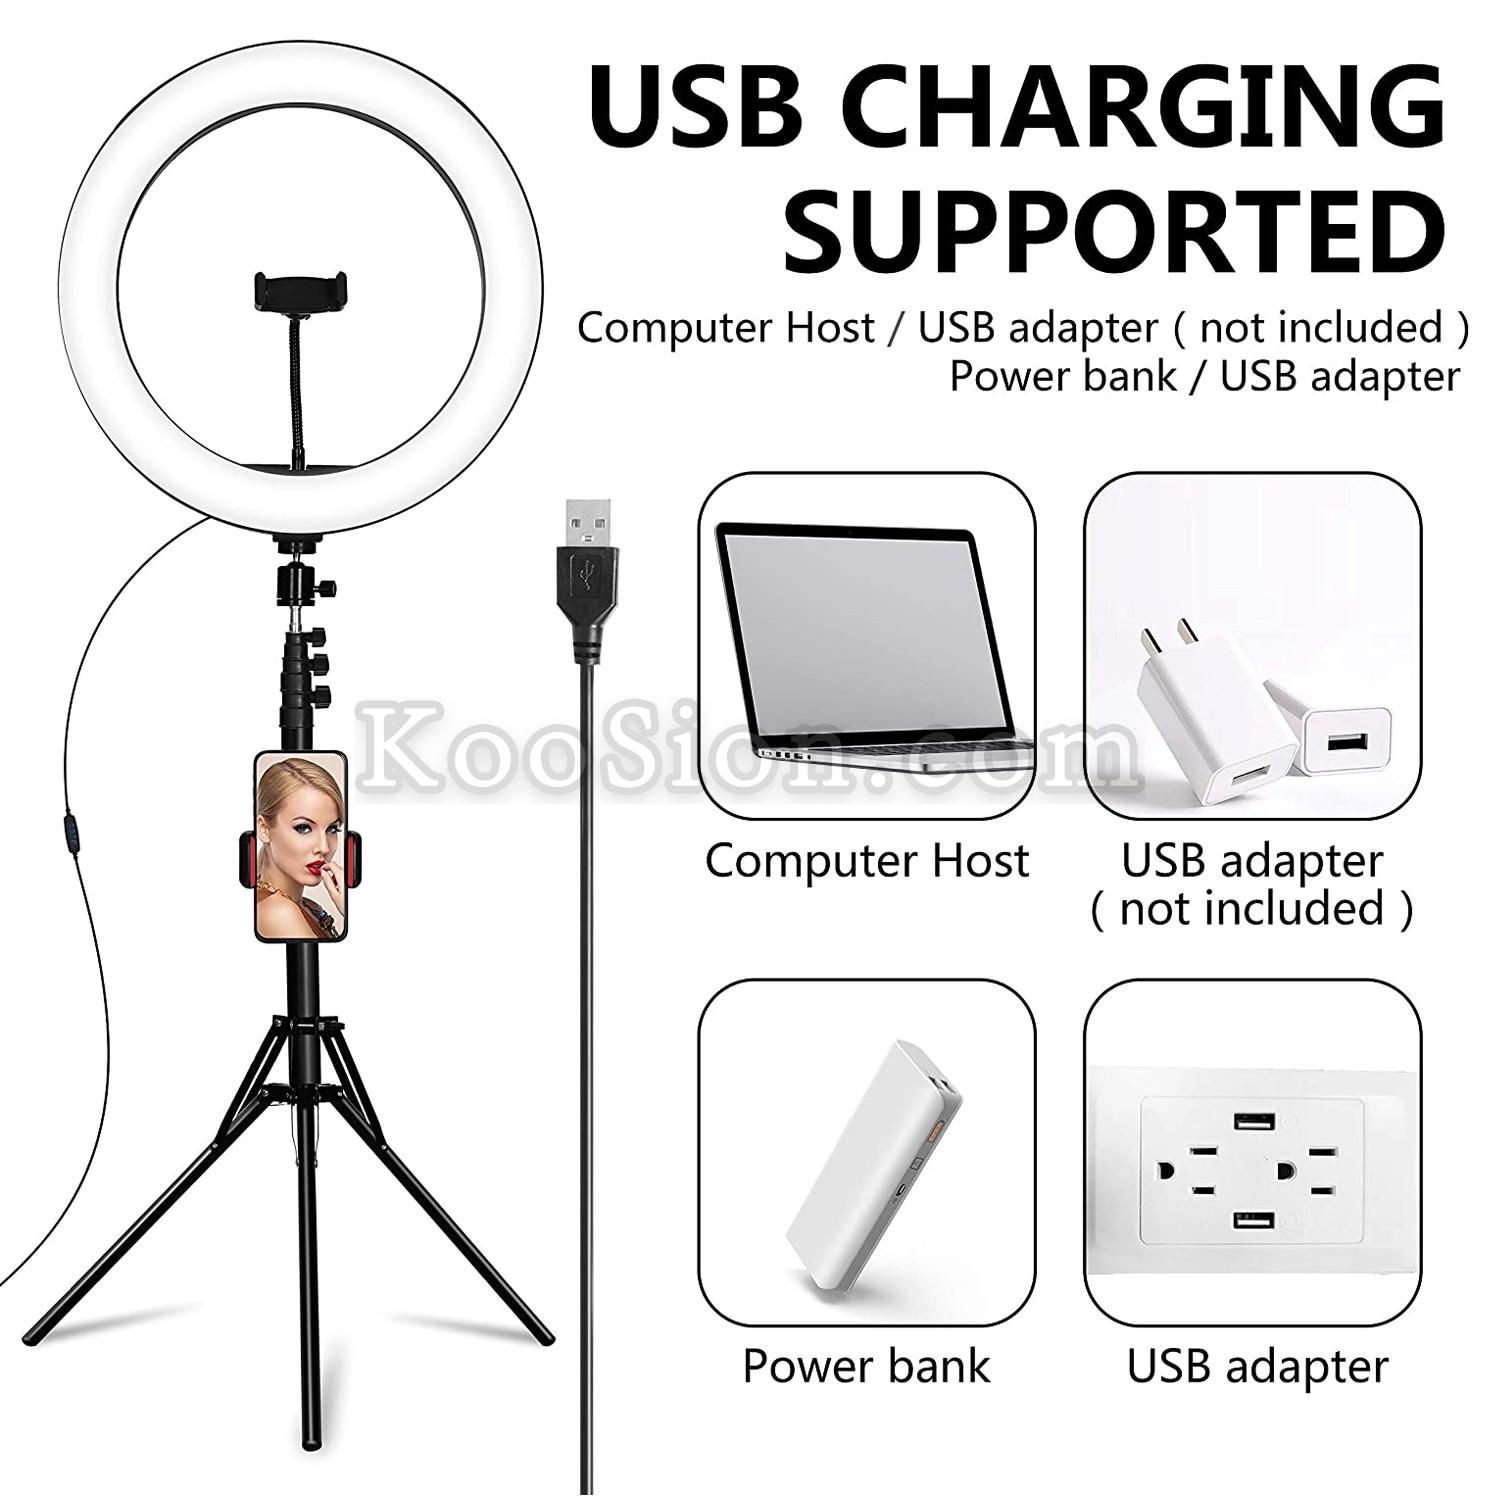 USB Powered Ring Light Circle LED Light with Tripod Stand for YouTube Video, TikTok, Live Streaming, Makeup, Selfie Photography